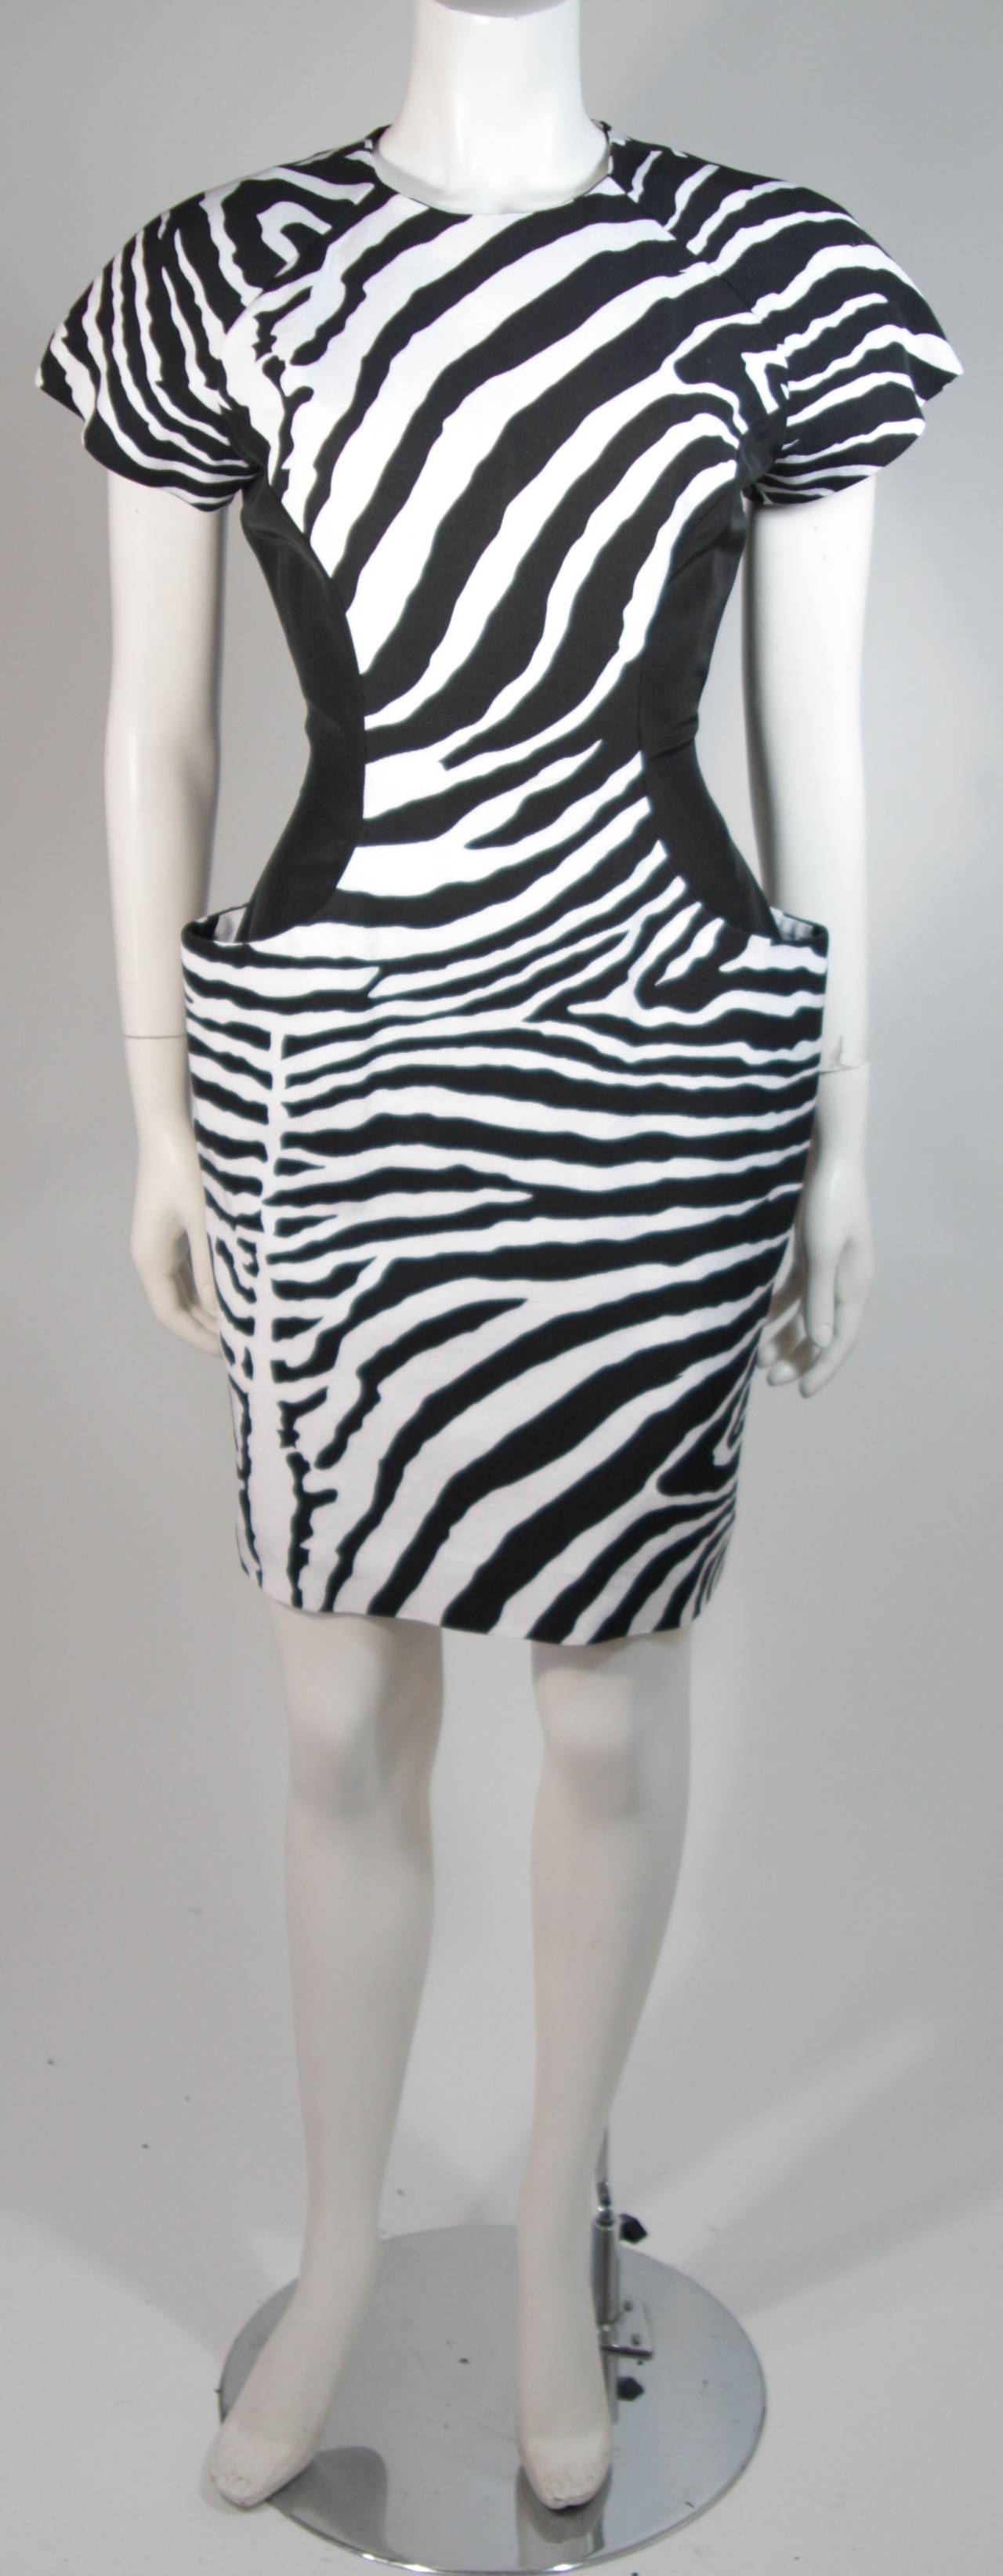 This Vicky Tiel cocktail dress is composed of a black and white zebra print fabric and a side panel color block in black. There are princess seam pockets on the front. There is a center back zipper closure for ease of access. In excellent condition.